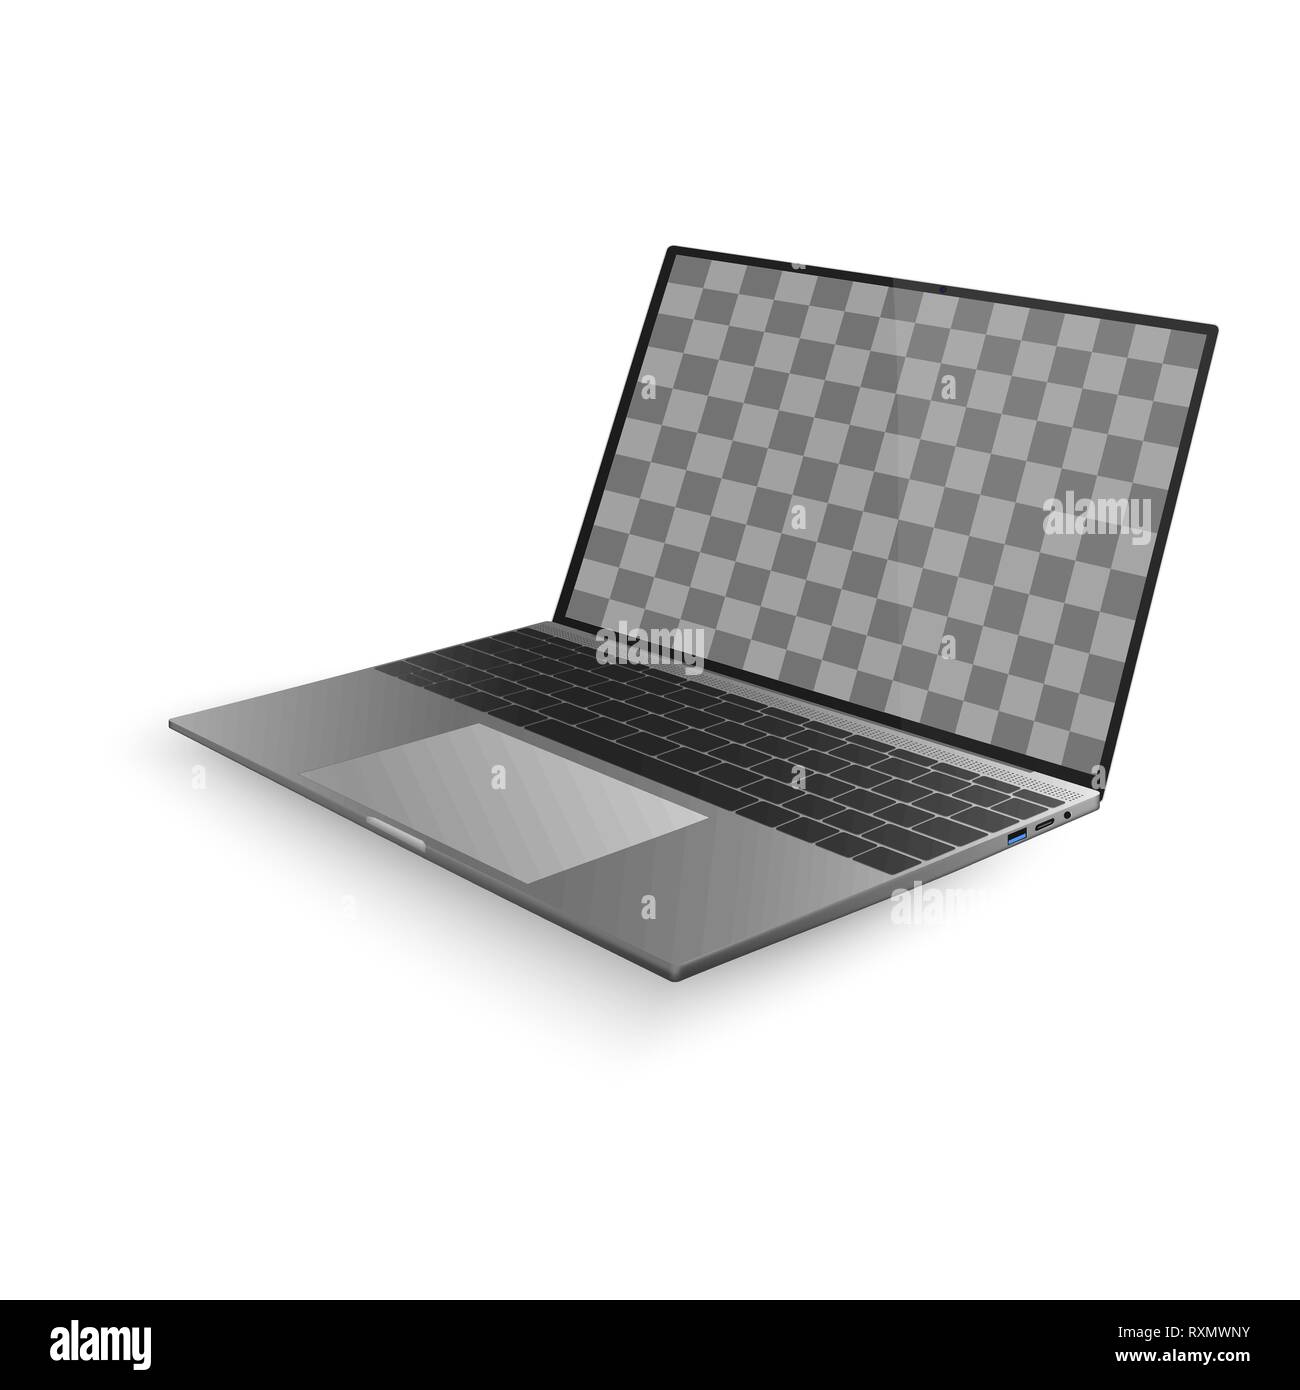 Laptop with shadow isolated on white background. Laptop design with black display and gray keyboard. Vector illustration Stock Vector